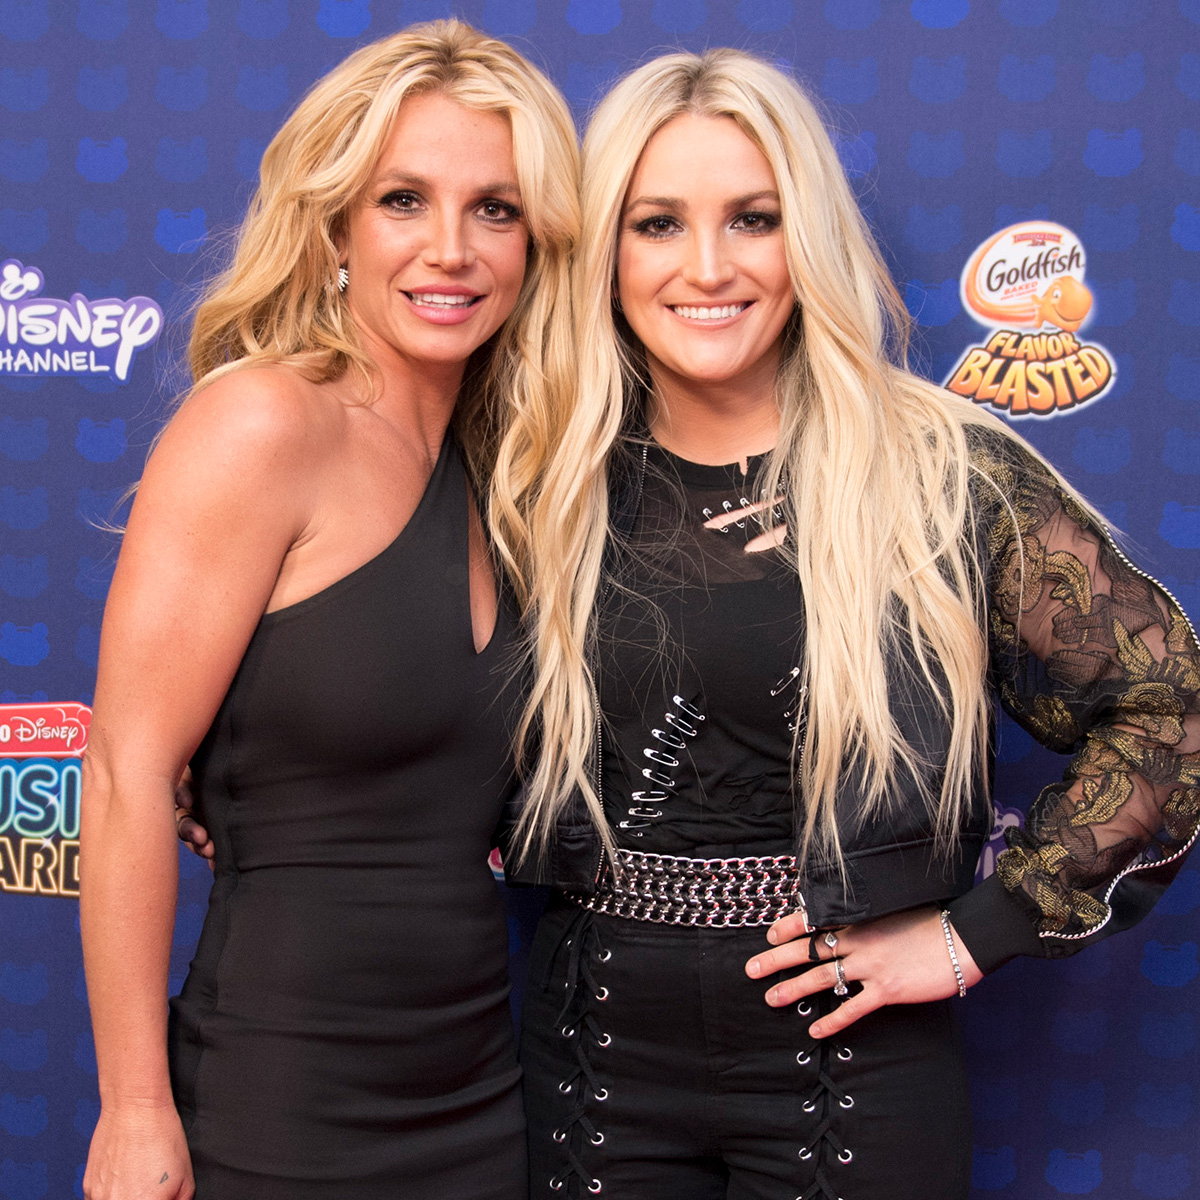 Jamie Lynn Spears Subtly Reacts to Britney’s Breakup From Sam Asghari